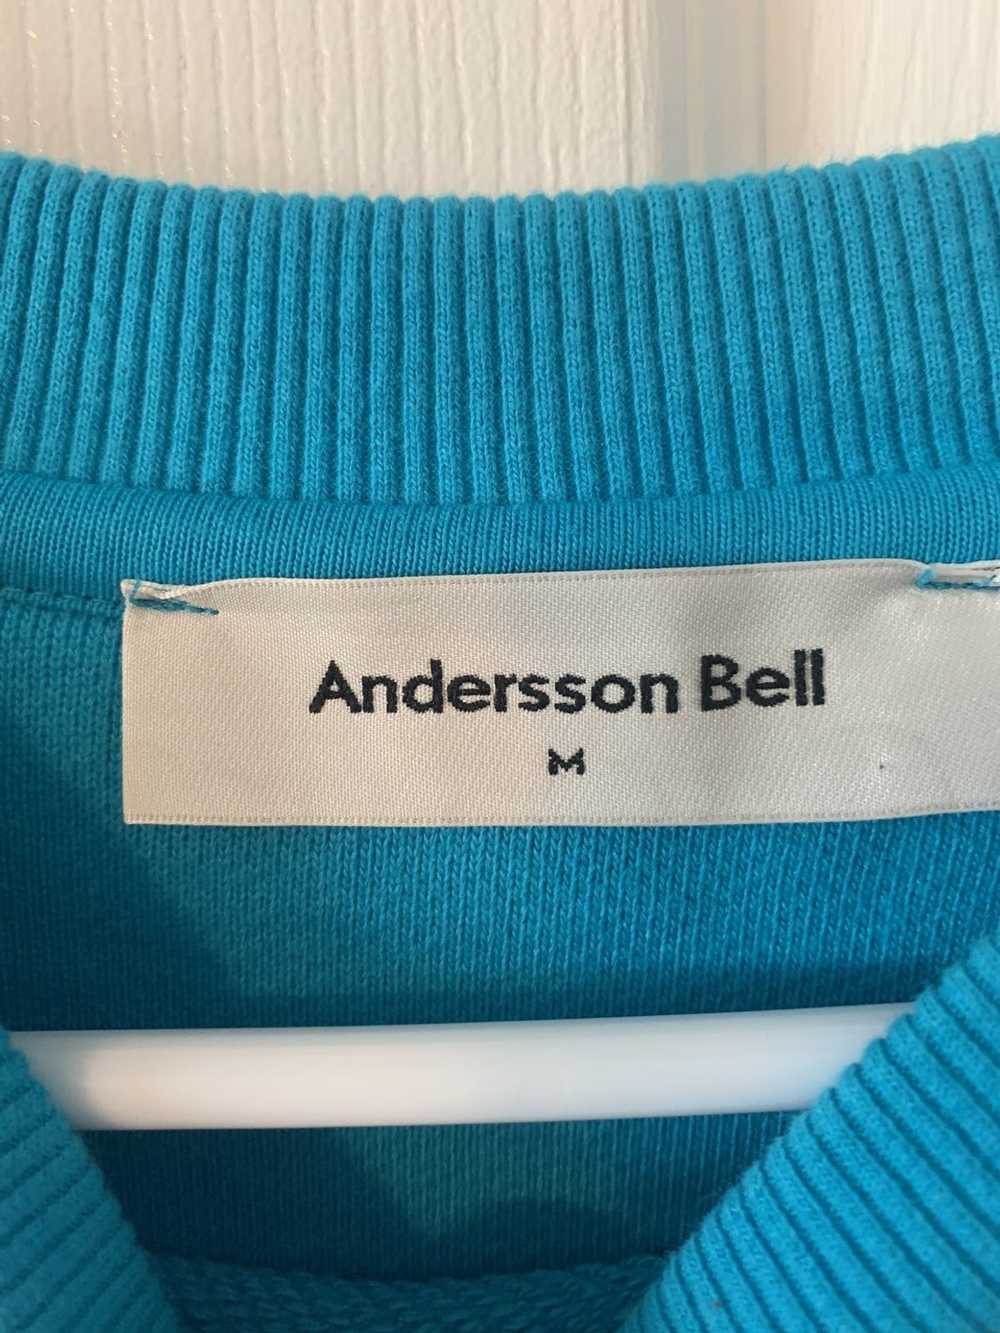 Andersson Bell Andersson Bell Crewneck Sweater - image 4